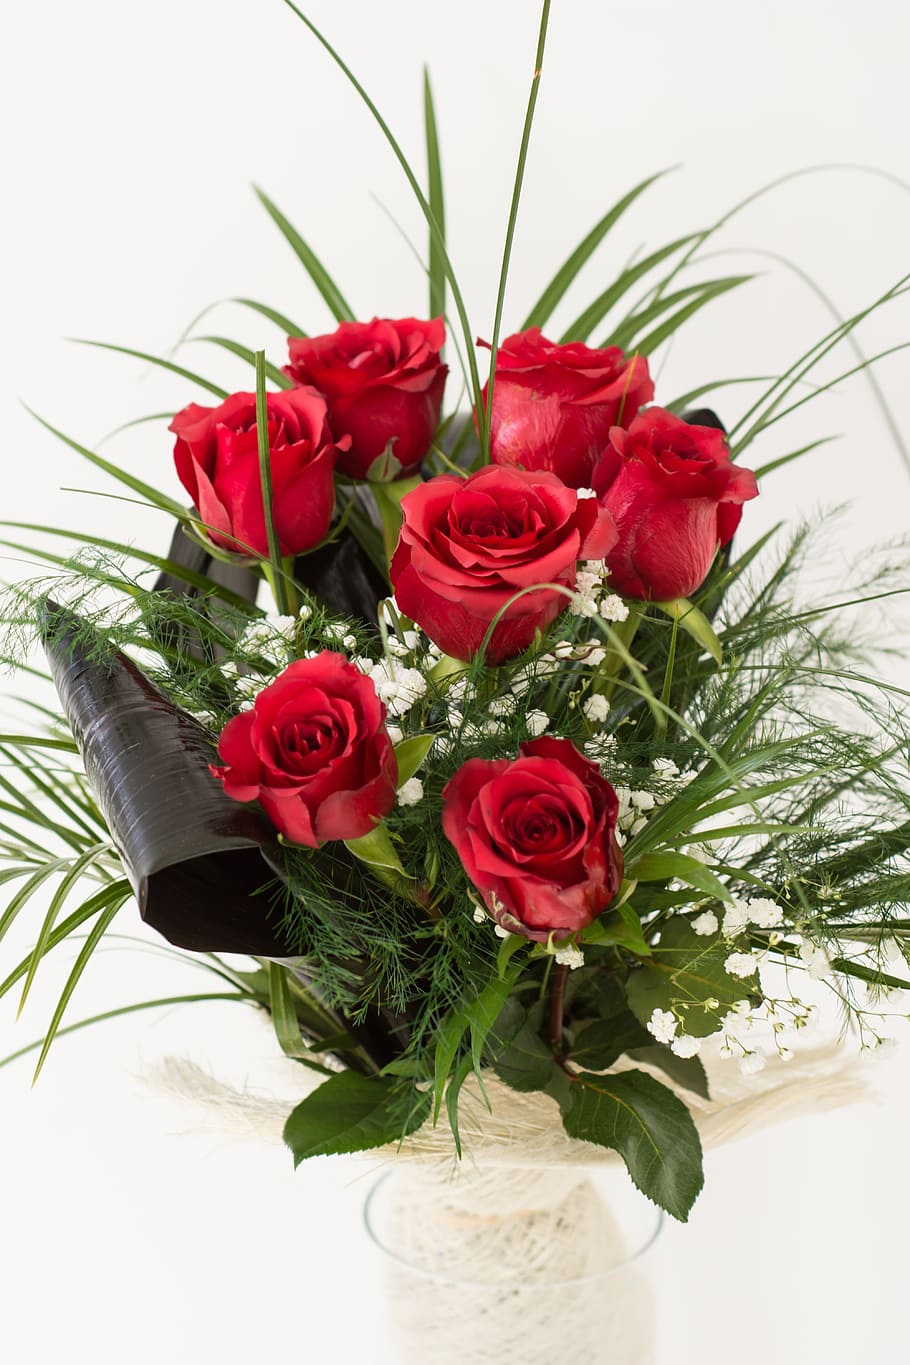 close-up photo, red, rose, flowers, vase, Red Roses, Flower, Love, roses, romance